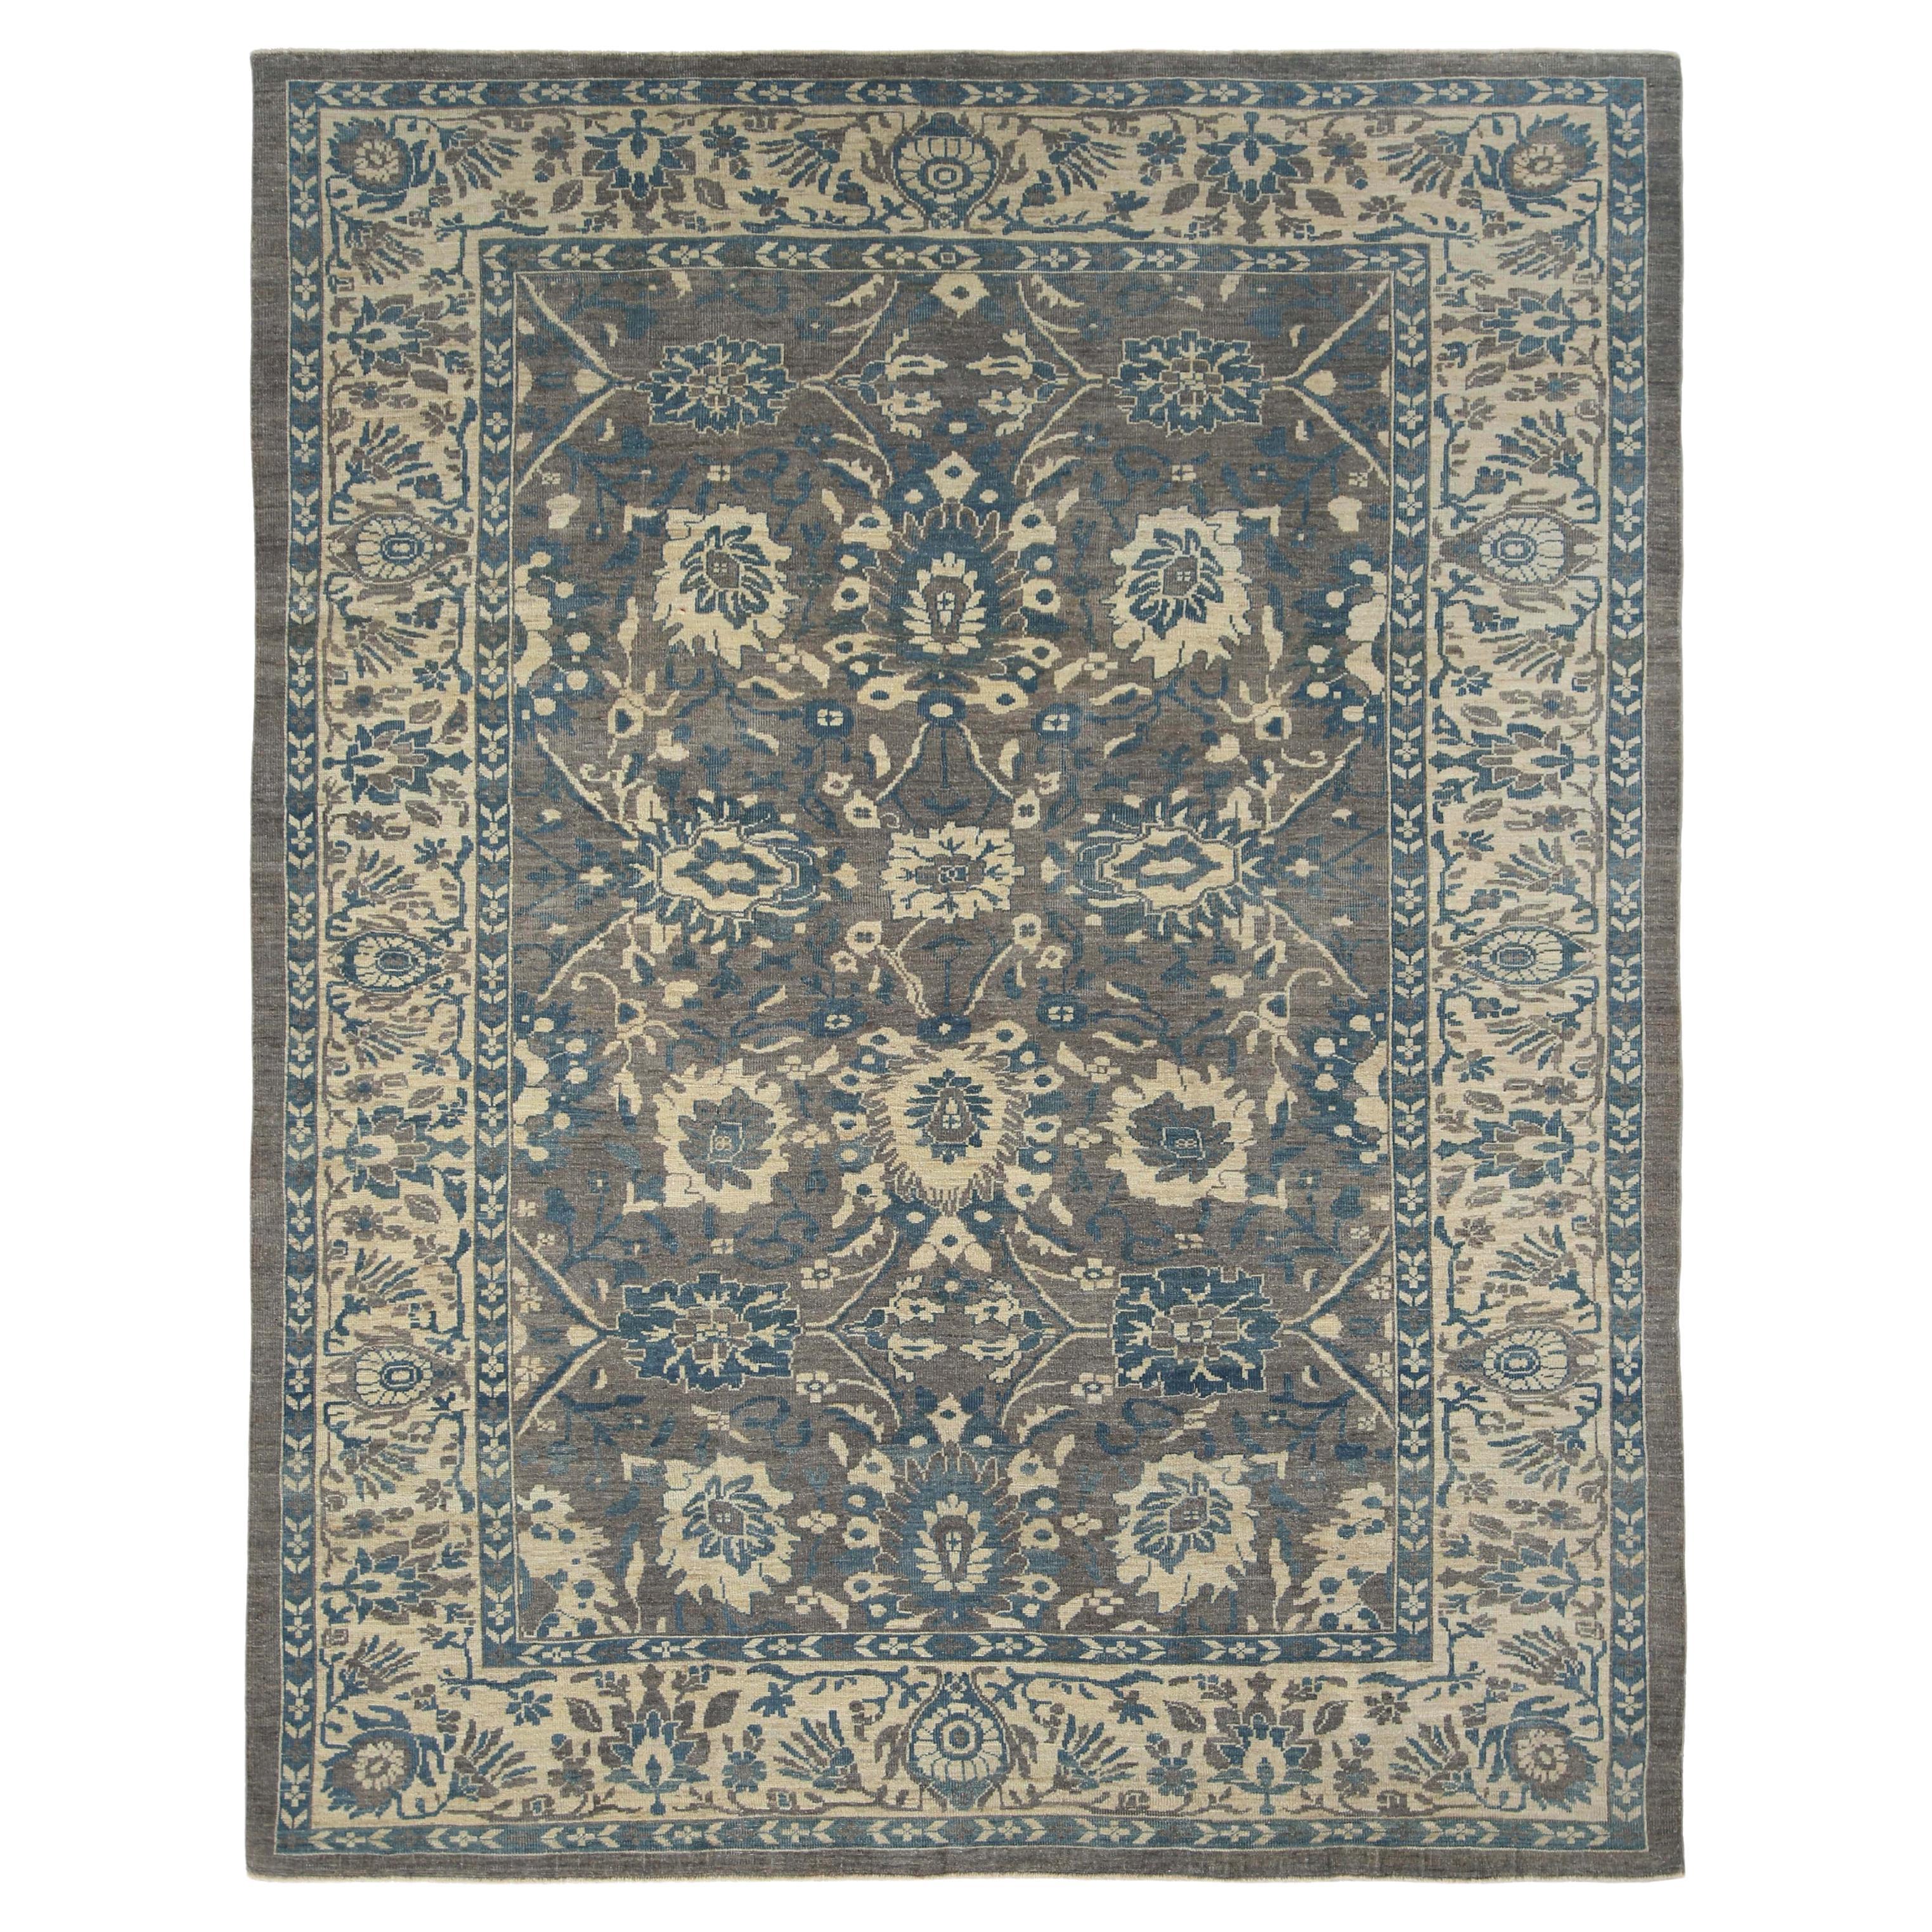 Luxurious Handmade Sultanabad Rug - Traditional Design, Blue, Grey, and Beige To For Sale